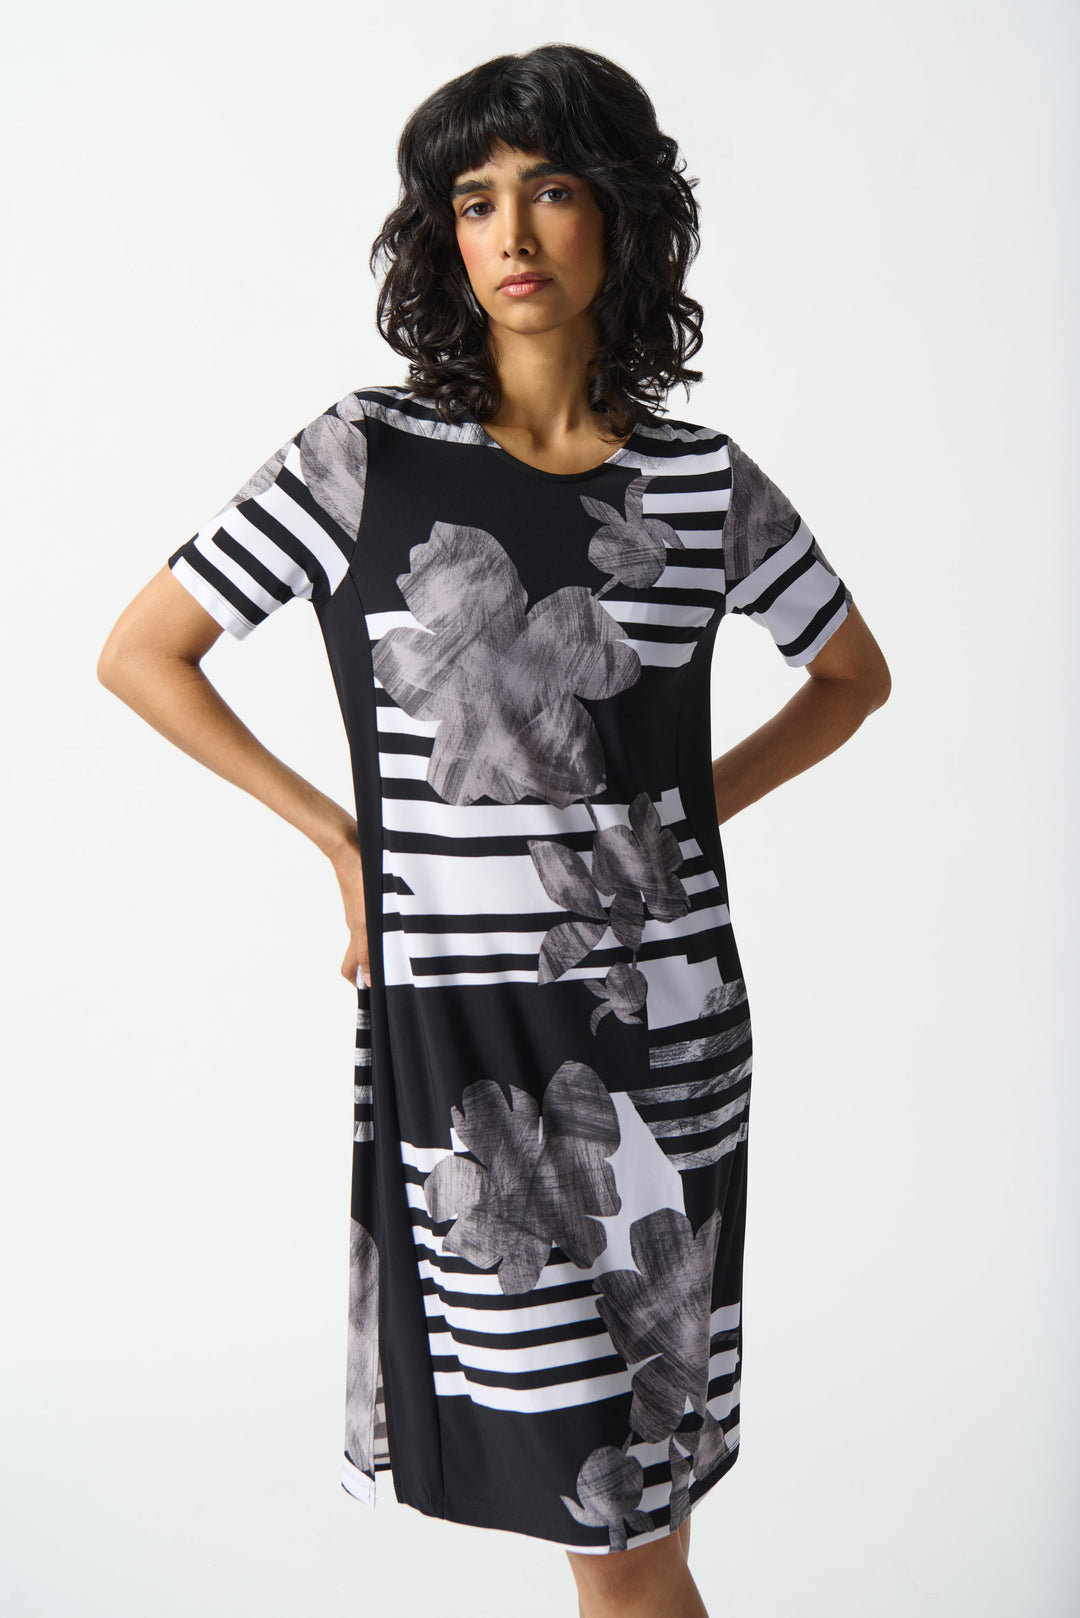 JOSEPH RIBKOFF Spring 2024 Its elegant yet casual design features a playful striped floral pattern and a below the knee length with side slit cuts at the hem.